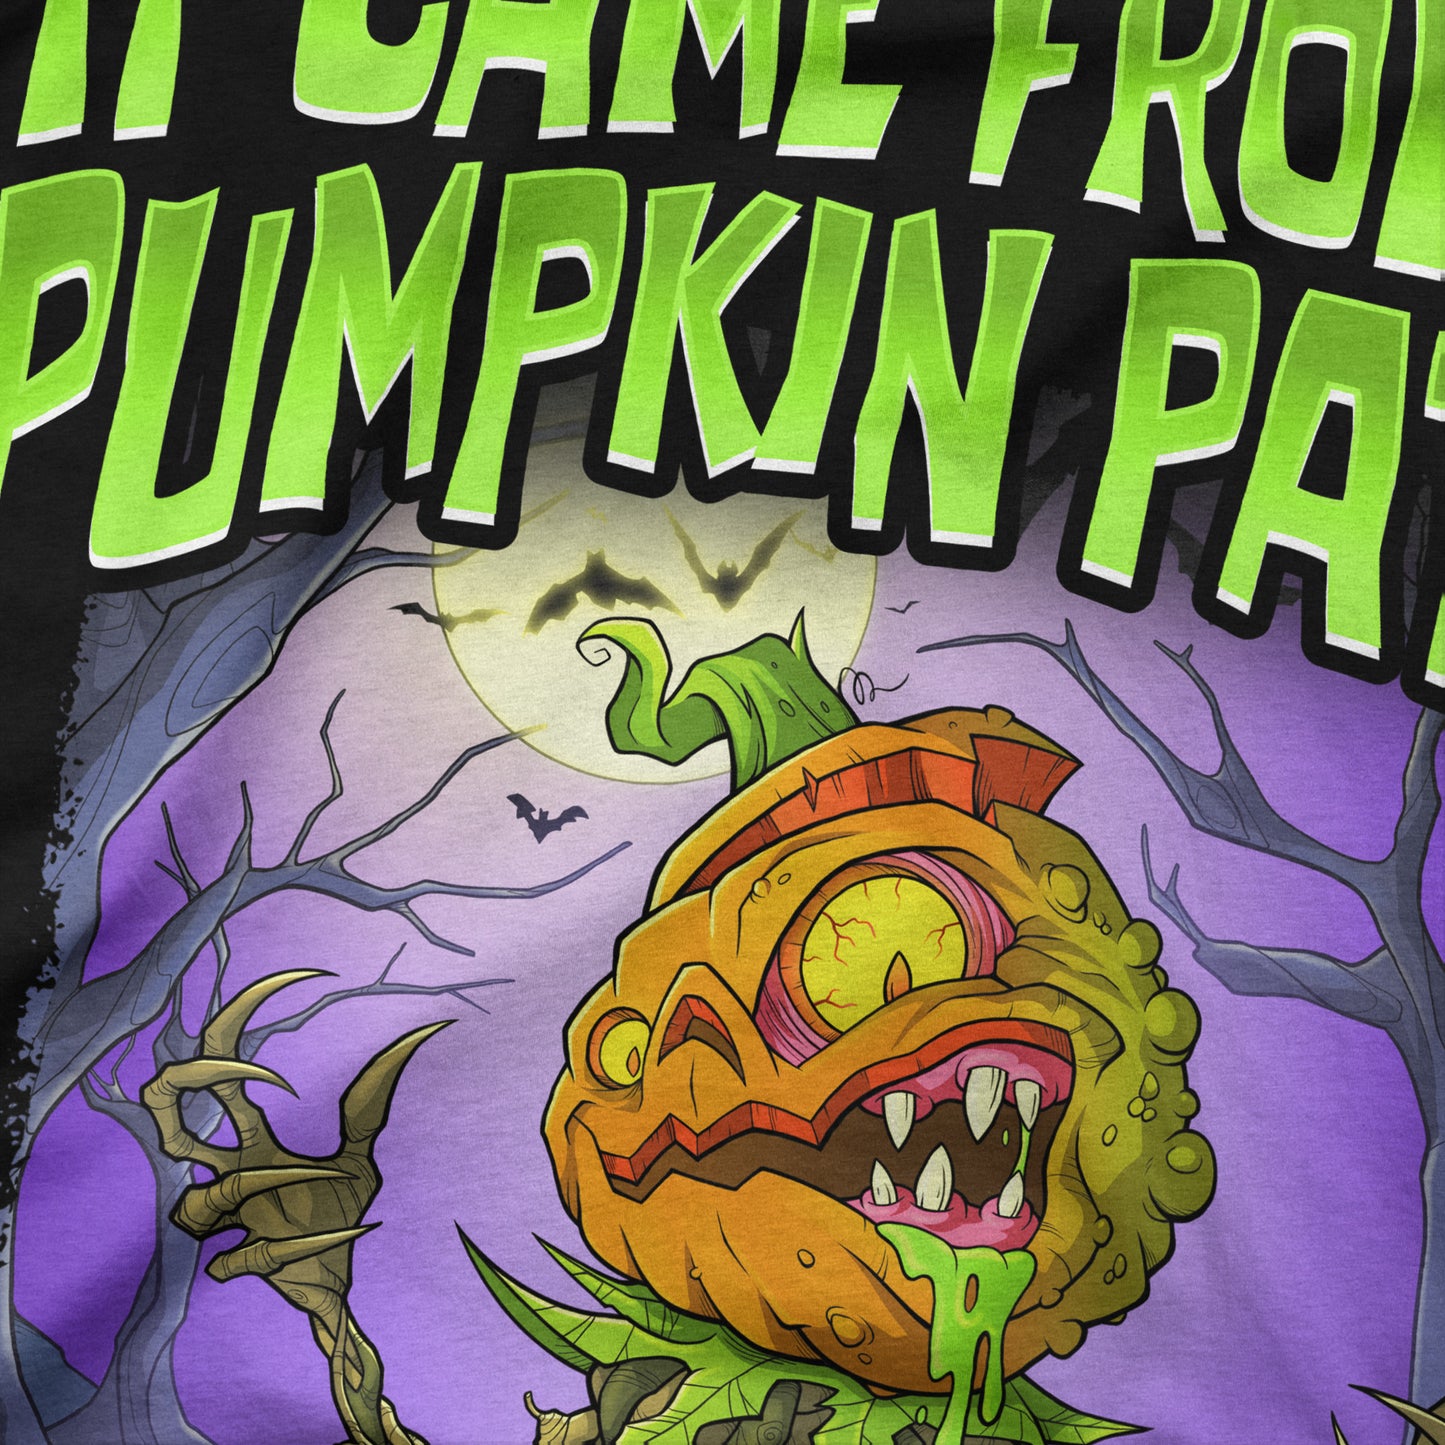 It Came From The Pumpkin Patch! - T-Shirt